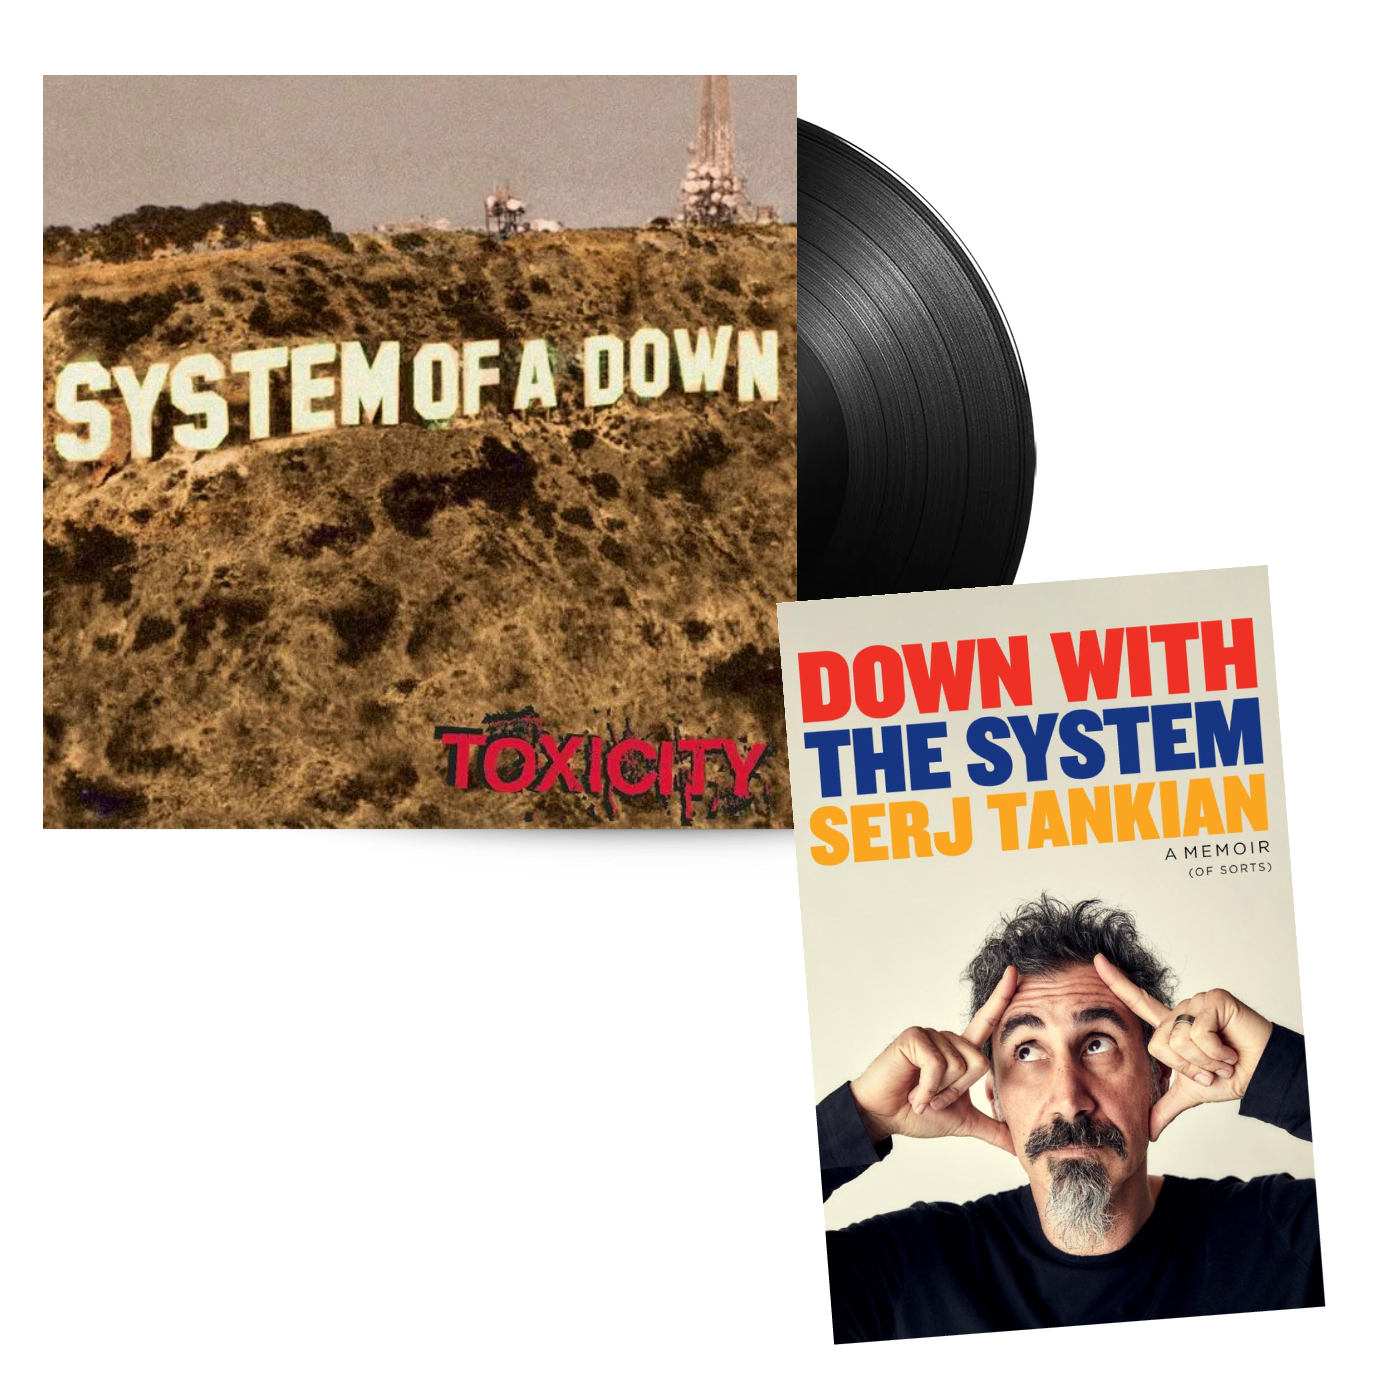 Toxicity: Vinyl LP & Signed Down With The System Book Bundle